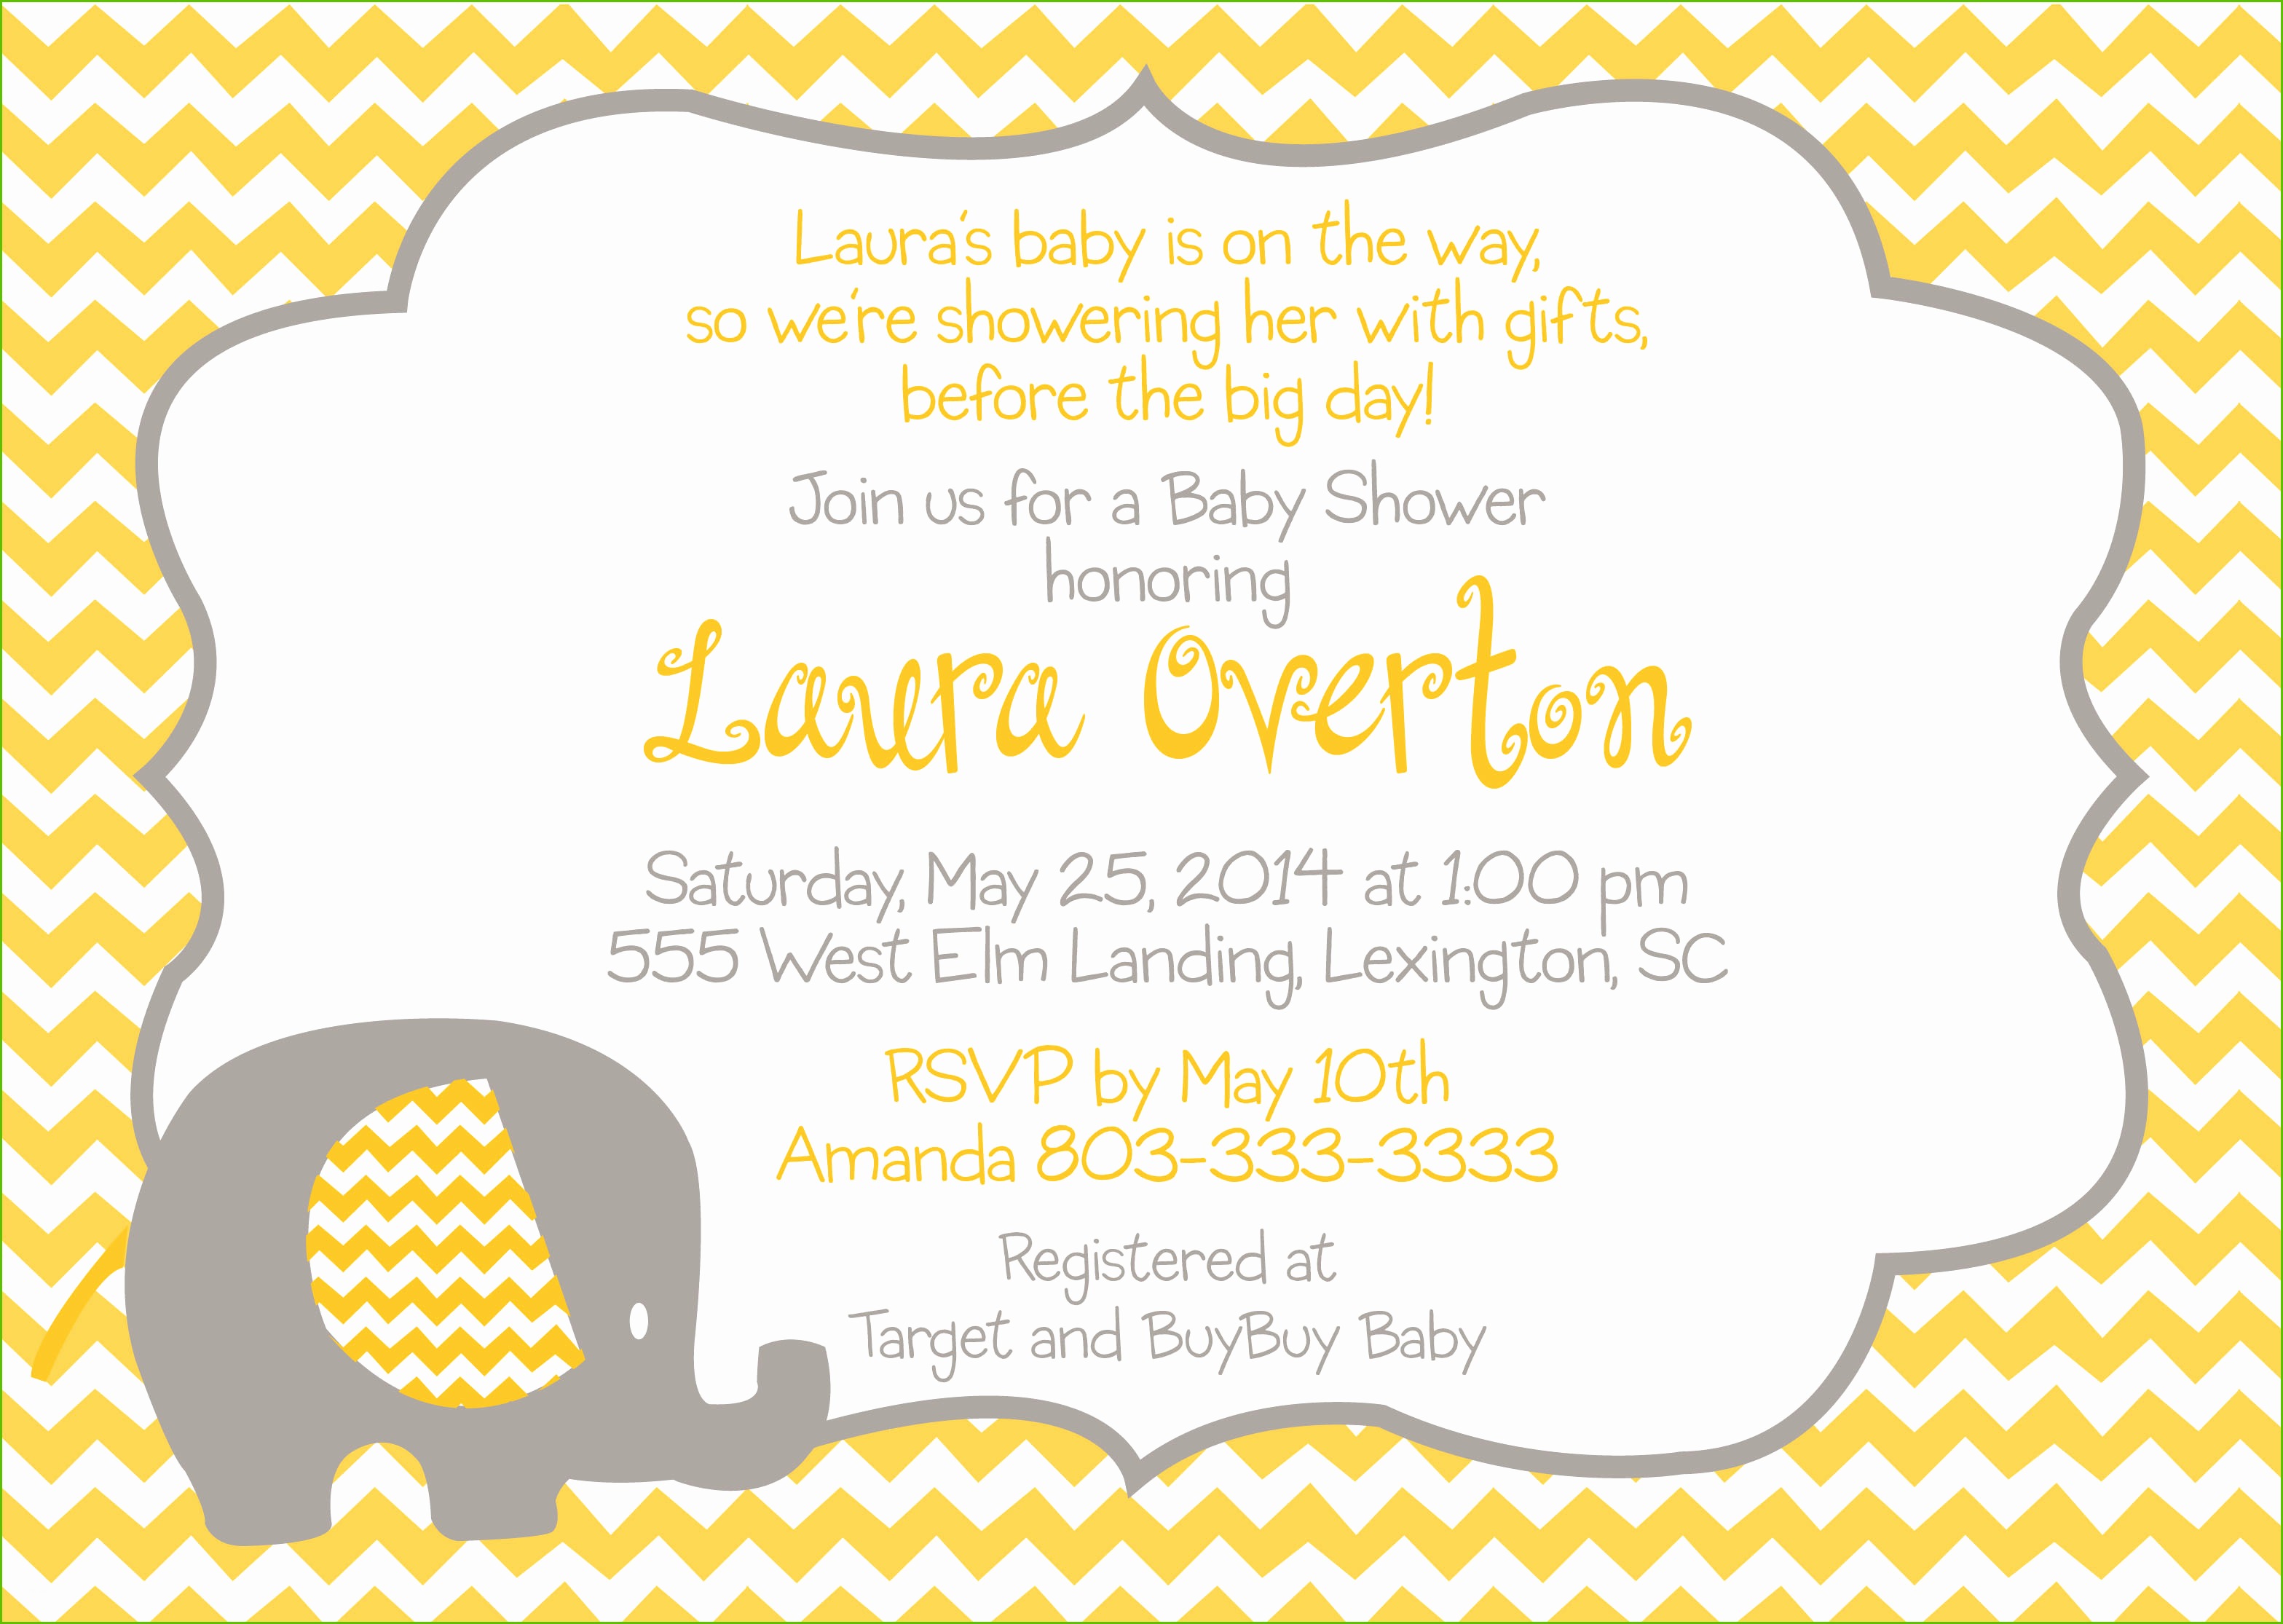 Full Size of Baby Shower:inspirational Elephant Baby Shower Invitations Photo Concepts Elephant Baby Shower Invitations Or Unique Baby Shower Gifts With Baby Shower Door Prizes Plus Baby Shower Messages Together With Creative Baby Shower Gifts As Well As Baby Shower Nail Designs And Baby Shower Corsage